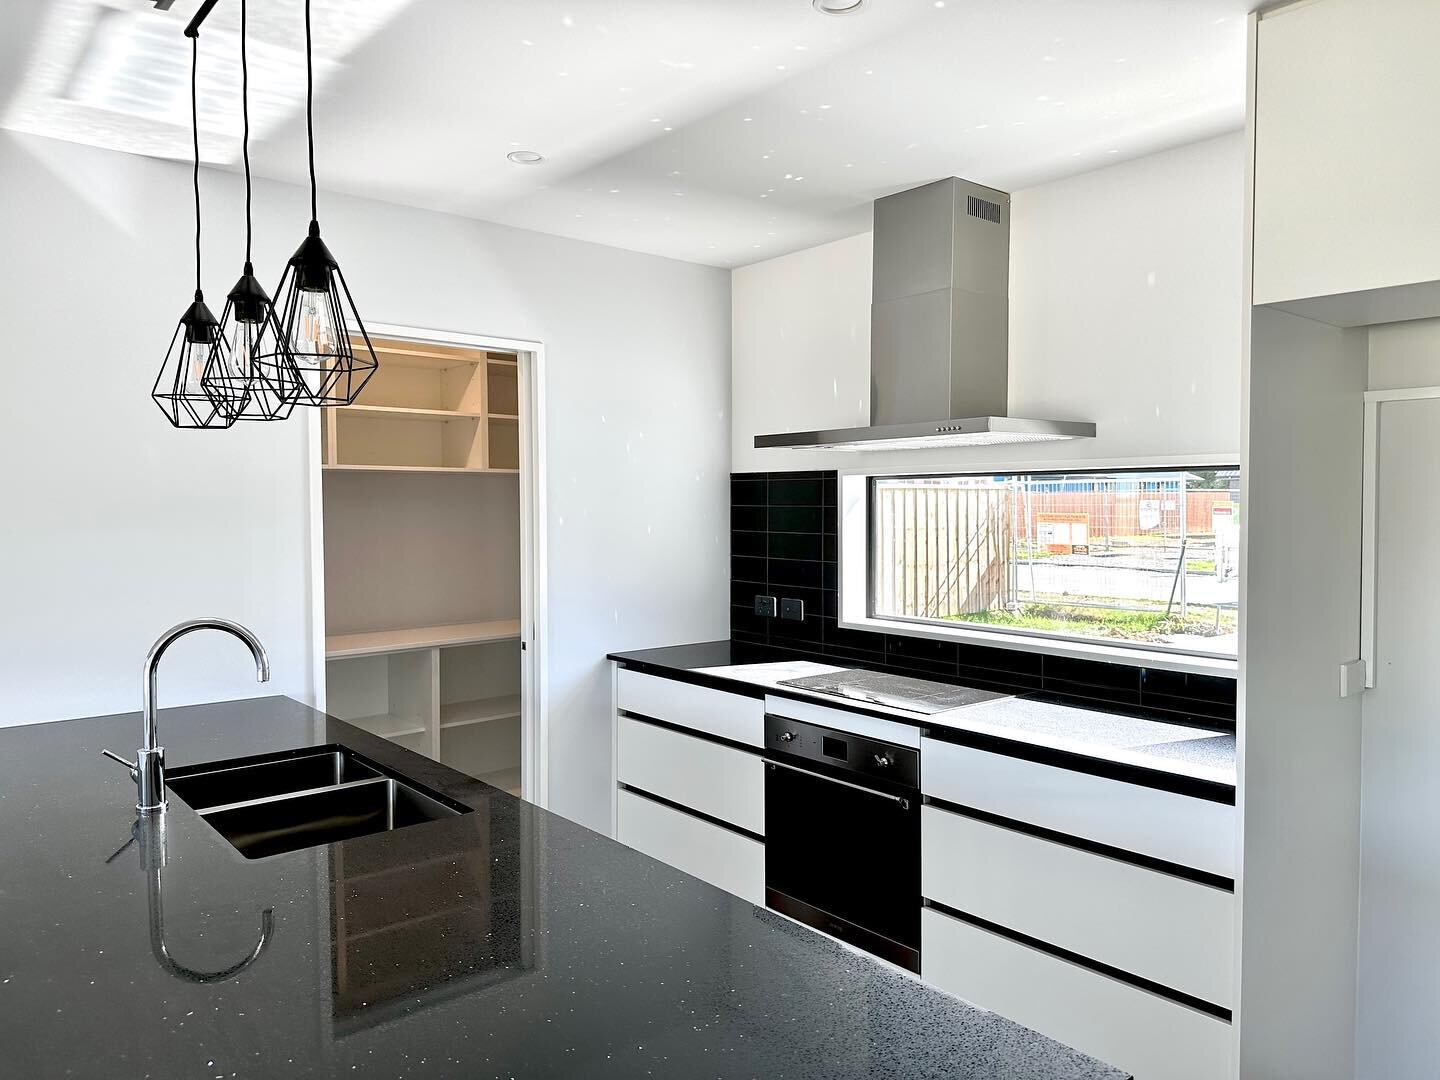 Create a kitchen that reflects your needs.

This classic combination of black and white is a bakers dream with plenty of counter space and optimal storage space. The minimalistic design can be used for entertainment or for when the family grows.

Spe